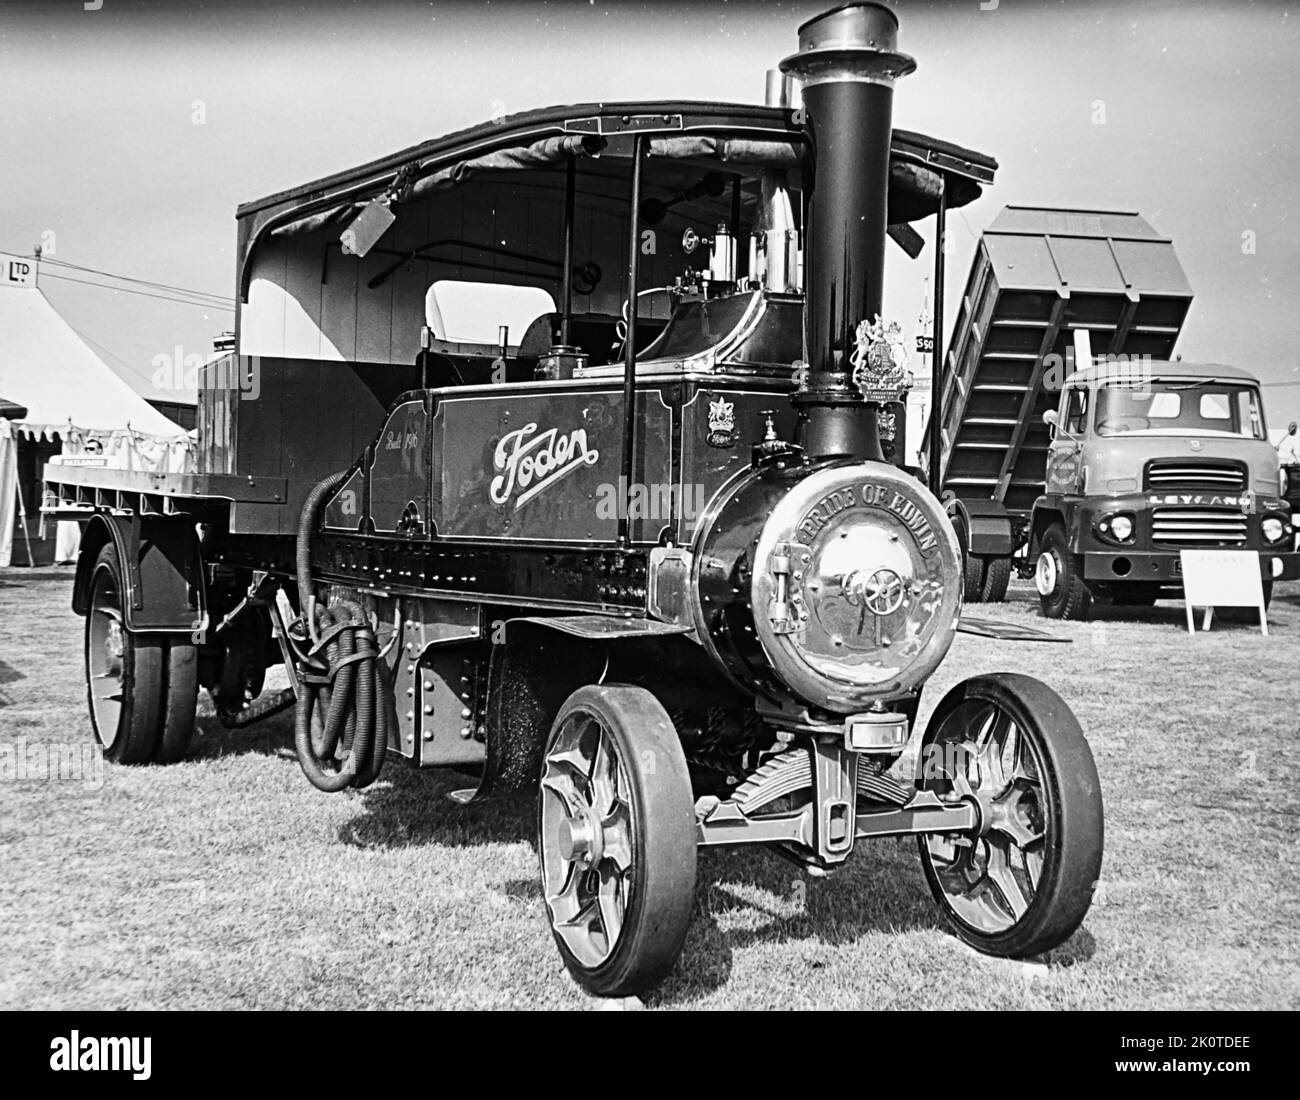 Foden Steam Wagon 'The Pride of Edwin' 1916. Foden Trucks was a British truck and bus manufacturing company which has its origins in Sandbach, Cheshire in 1856. 'Pride of Edwin' Works Number 6368. Registered 'M 8118' July 1916 new to The Portsmouth & Gosport Gas, Coke & Light Company. 5 ton Compound engined steam wagon Stock Photo